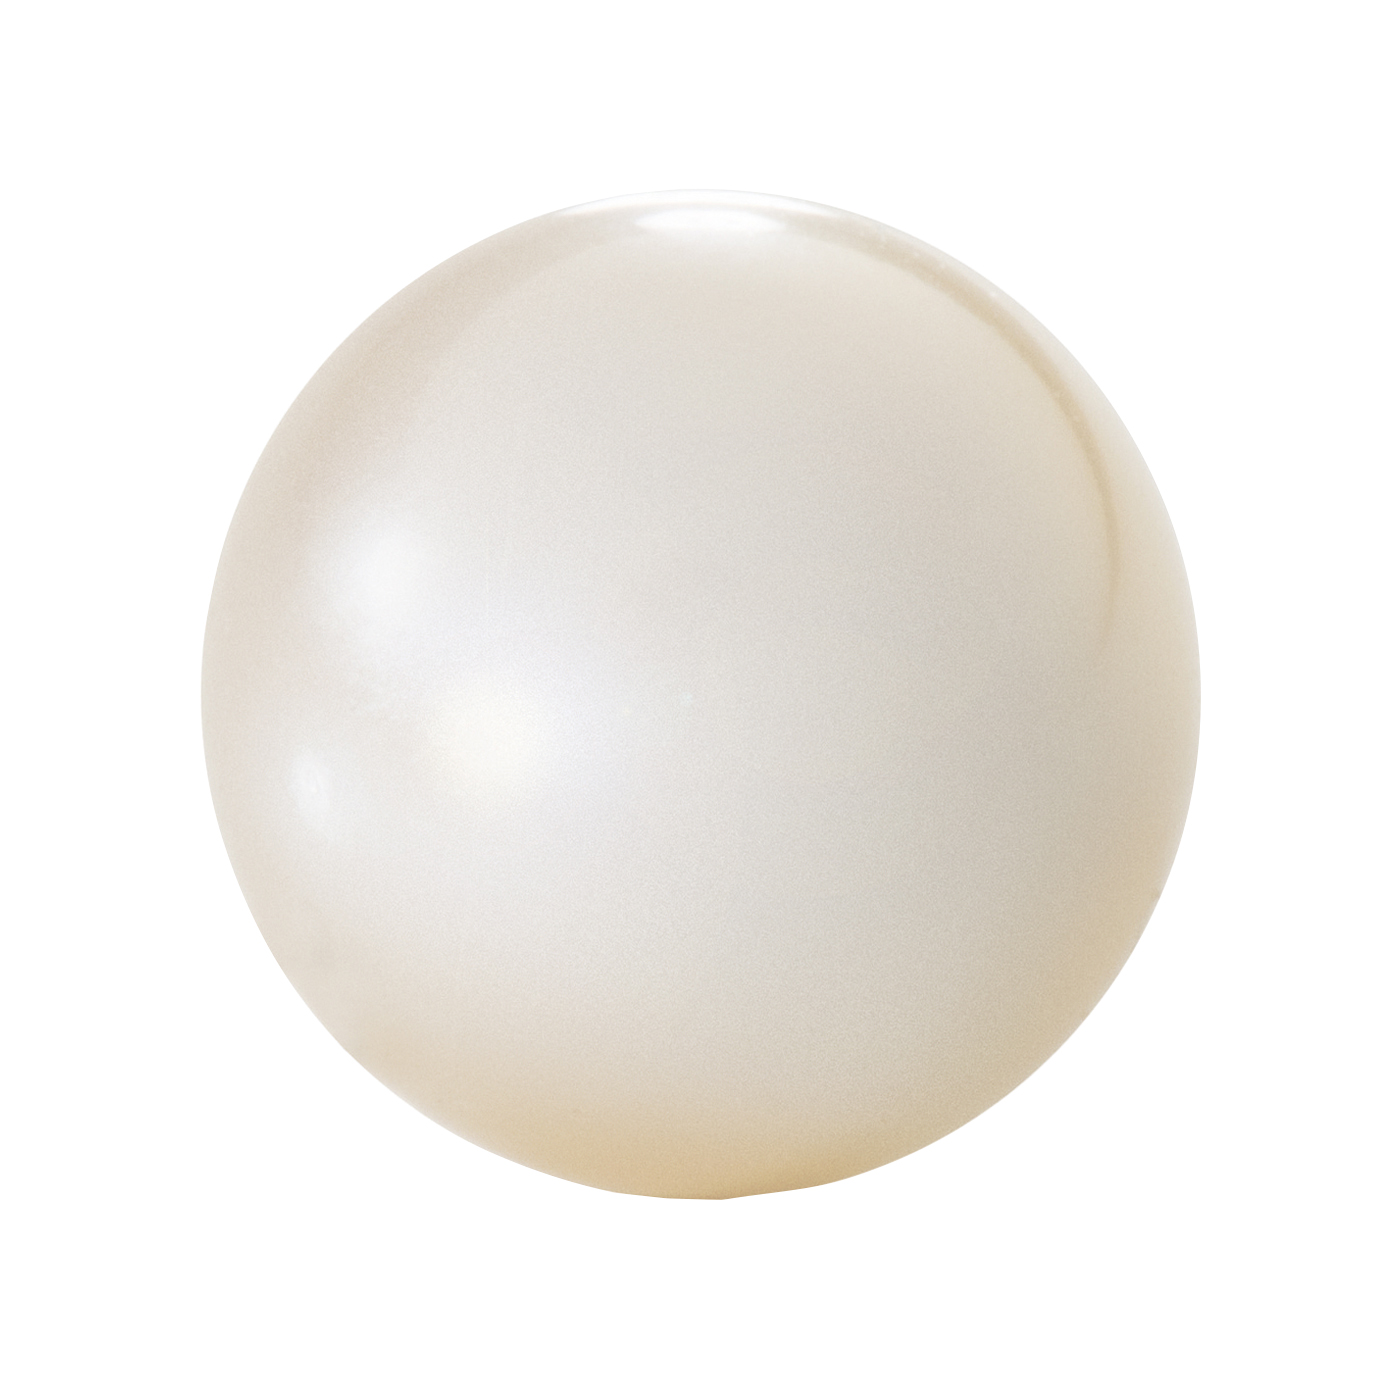 Cultured Pearl, Freshwater, 4/4, ø 3.5-4.0 mm, White - 1 piece